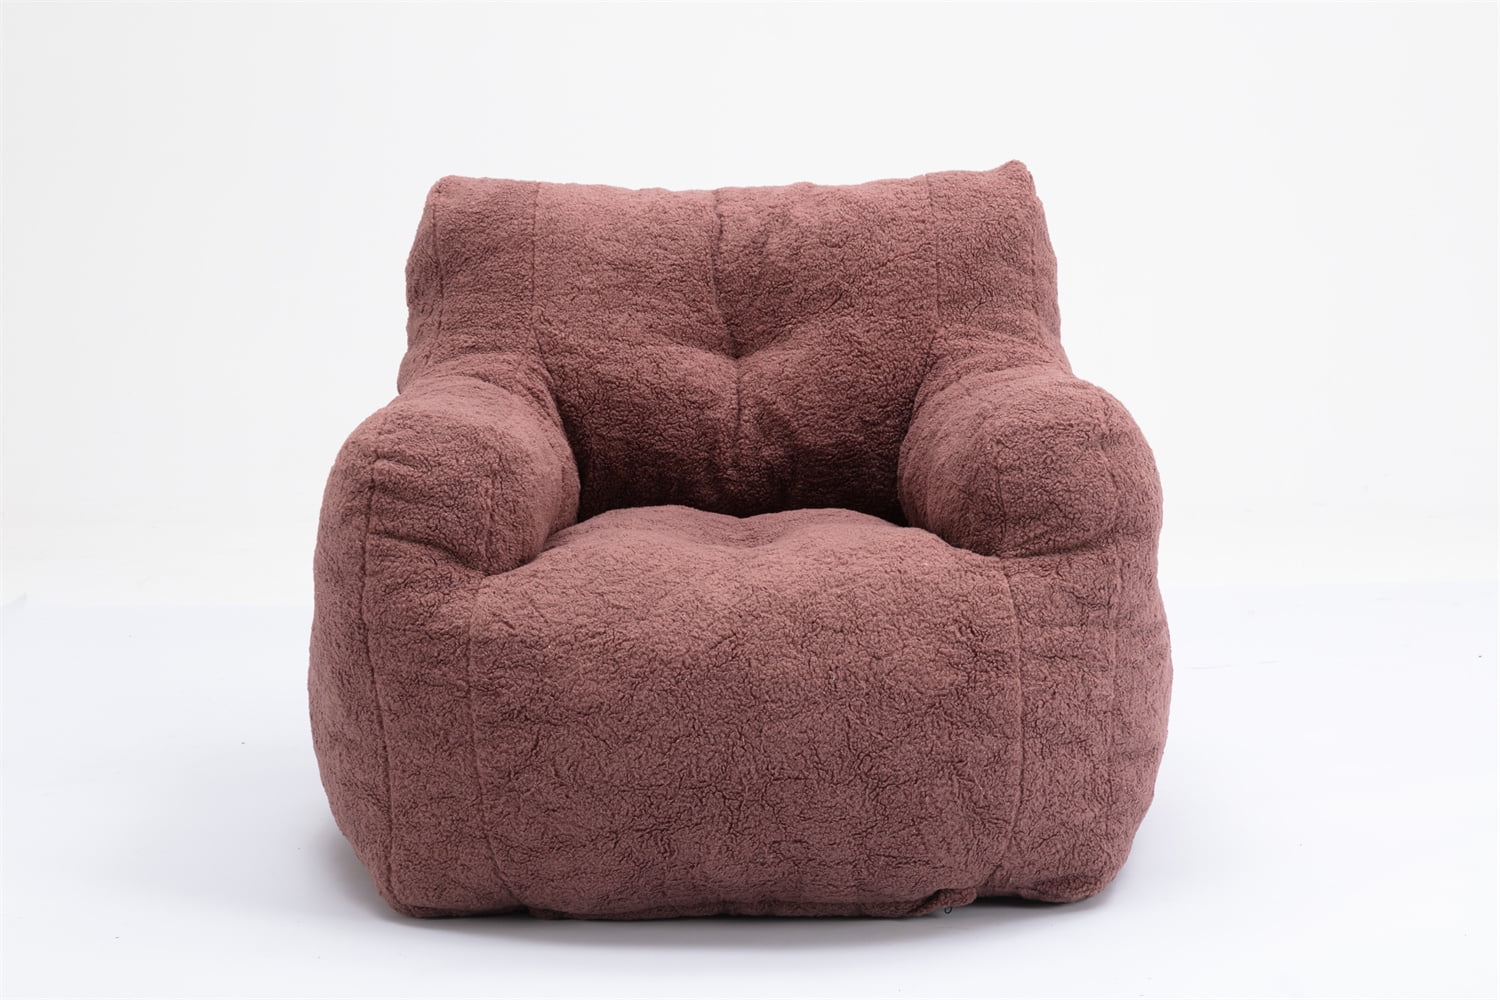 PINNKL Bean Bag Chairs with Filling, Soft Fluffy Togo